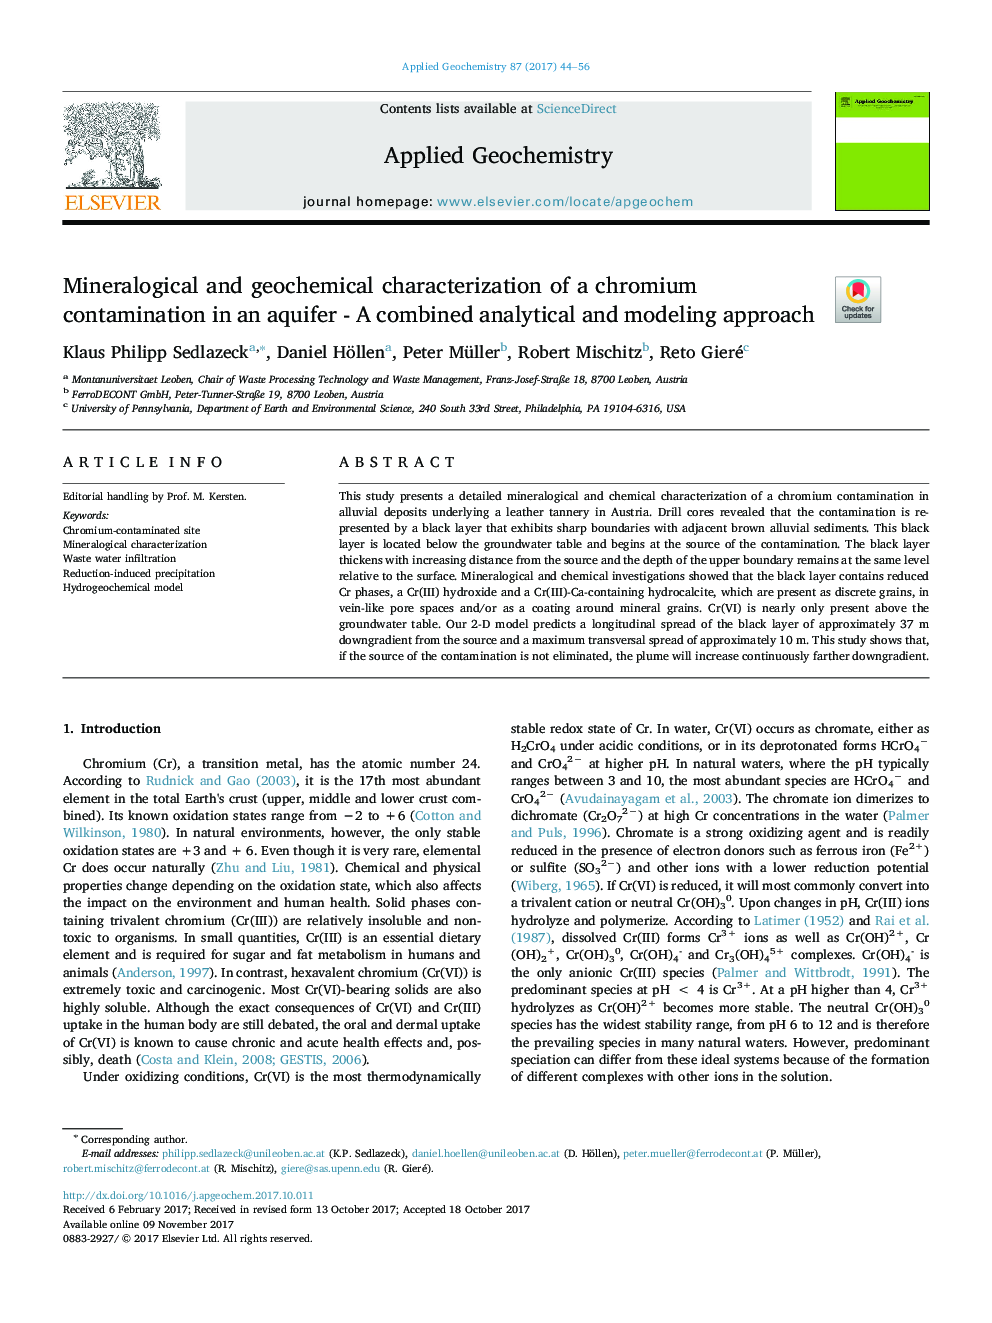 Mineralogical and geochemical characterization of a chromium contamination in an aquifer - A combined analytical and modeling approach